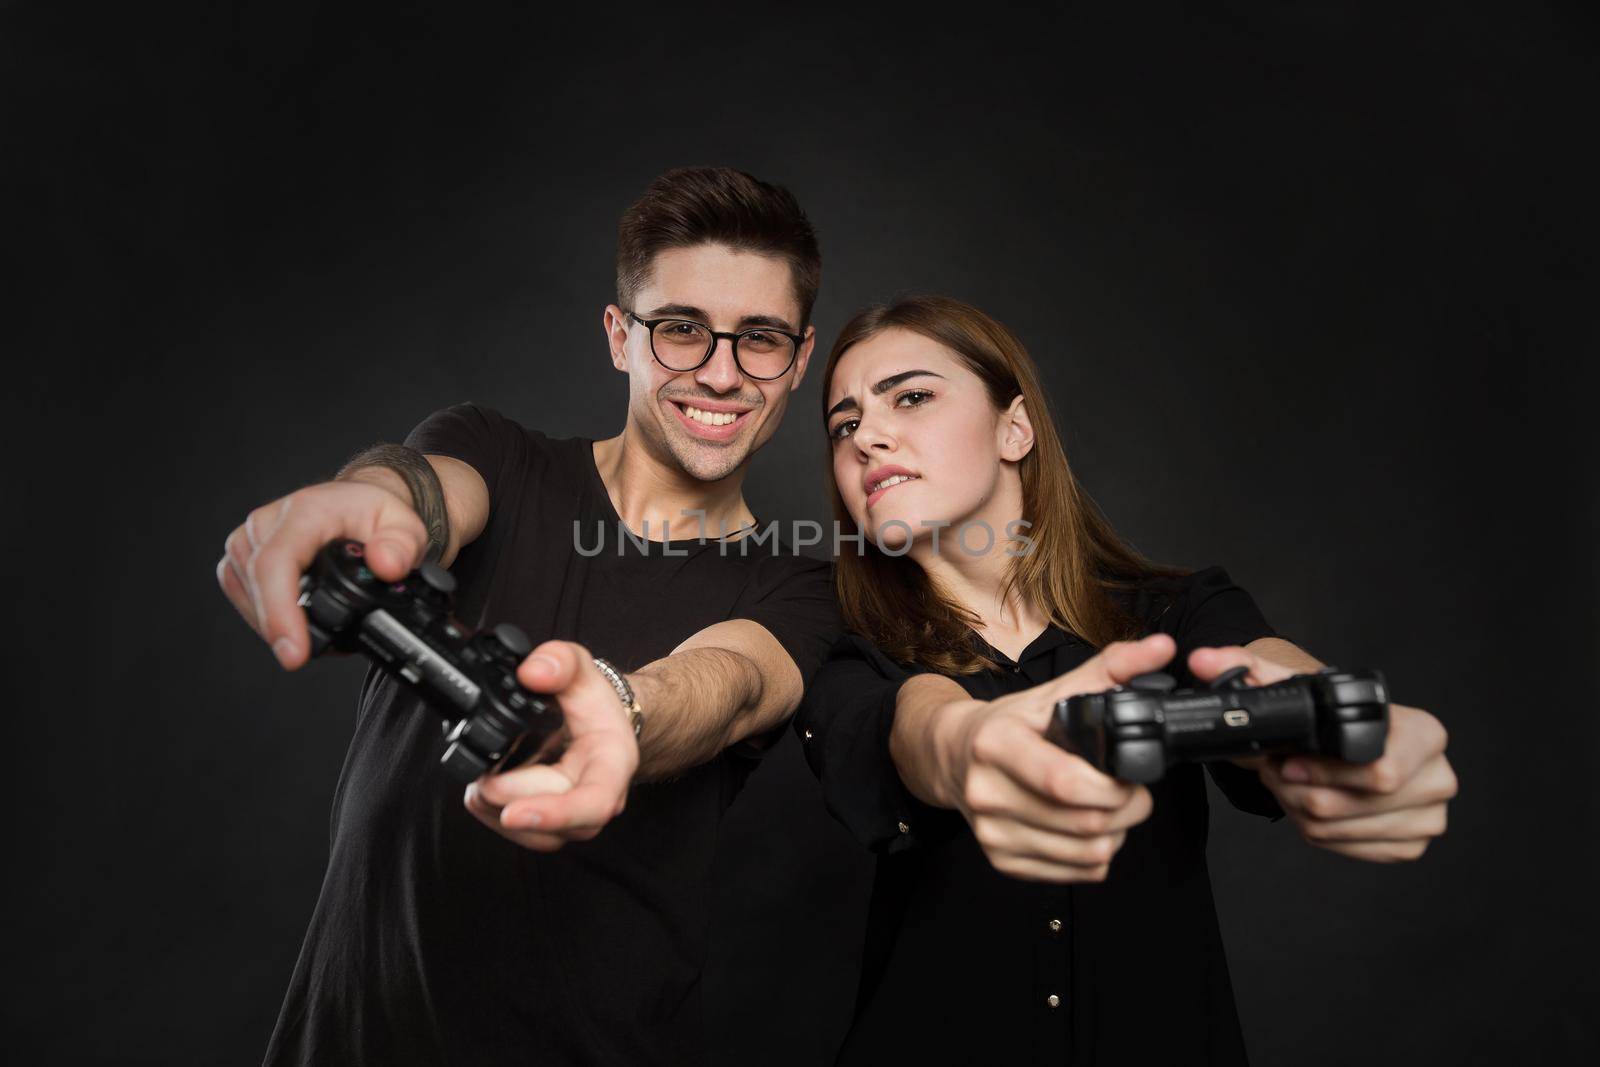 Beautiful young couple playing video games with joysticks together, isolated on black background by StudioPeace